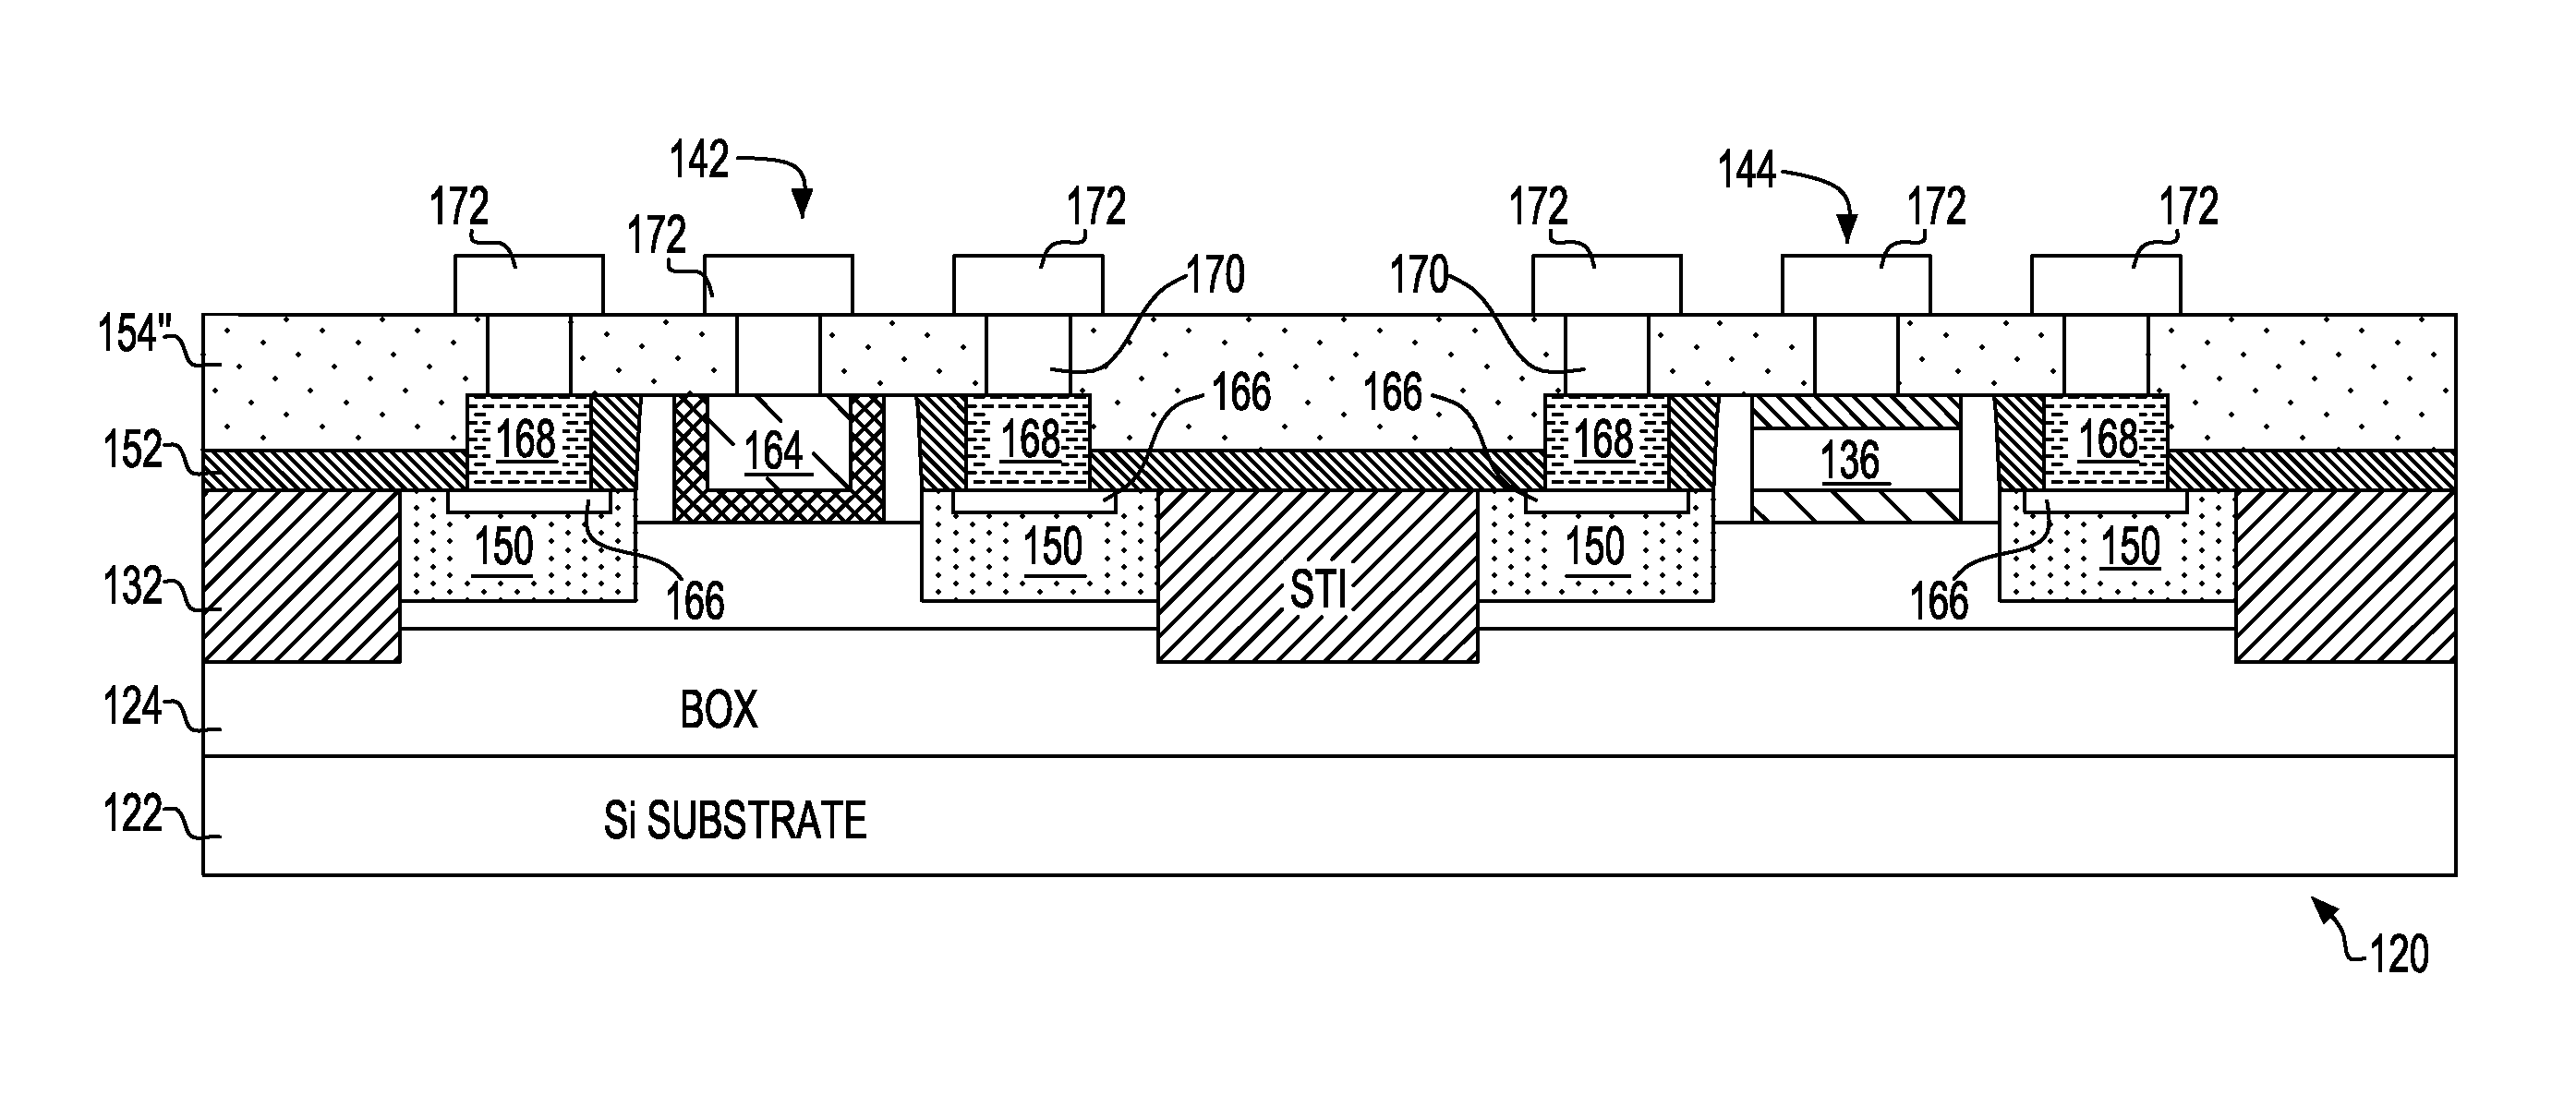 Integrated circuit (IC) chip having both metal and silicon gate field effect transistors (FETs) and method of manufacture